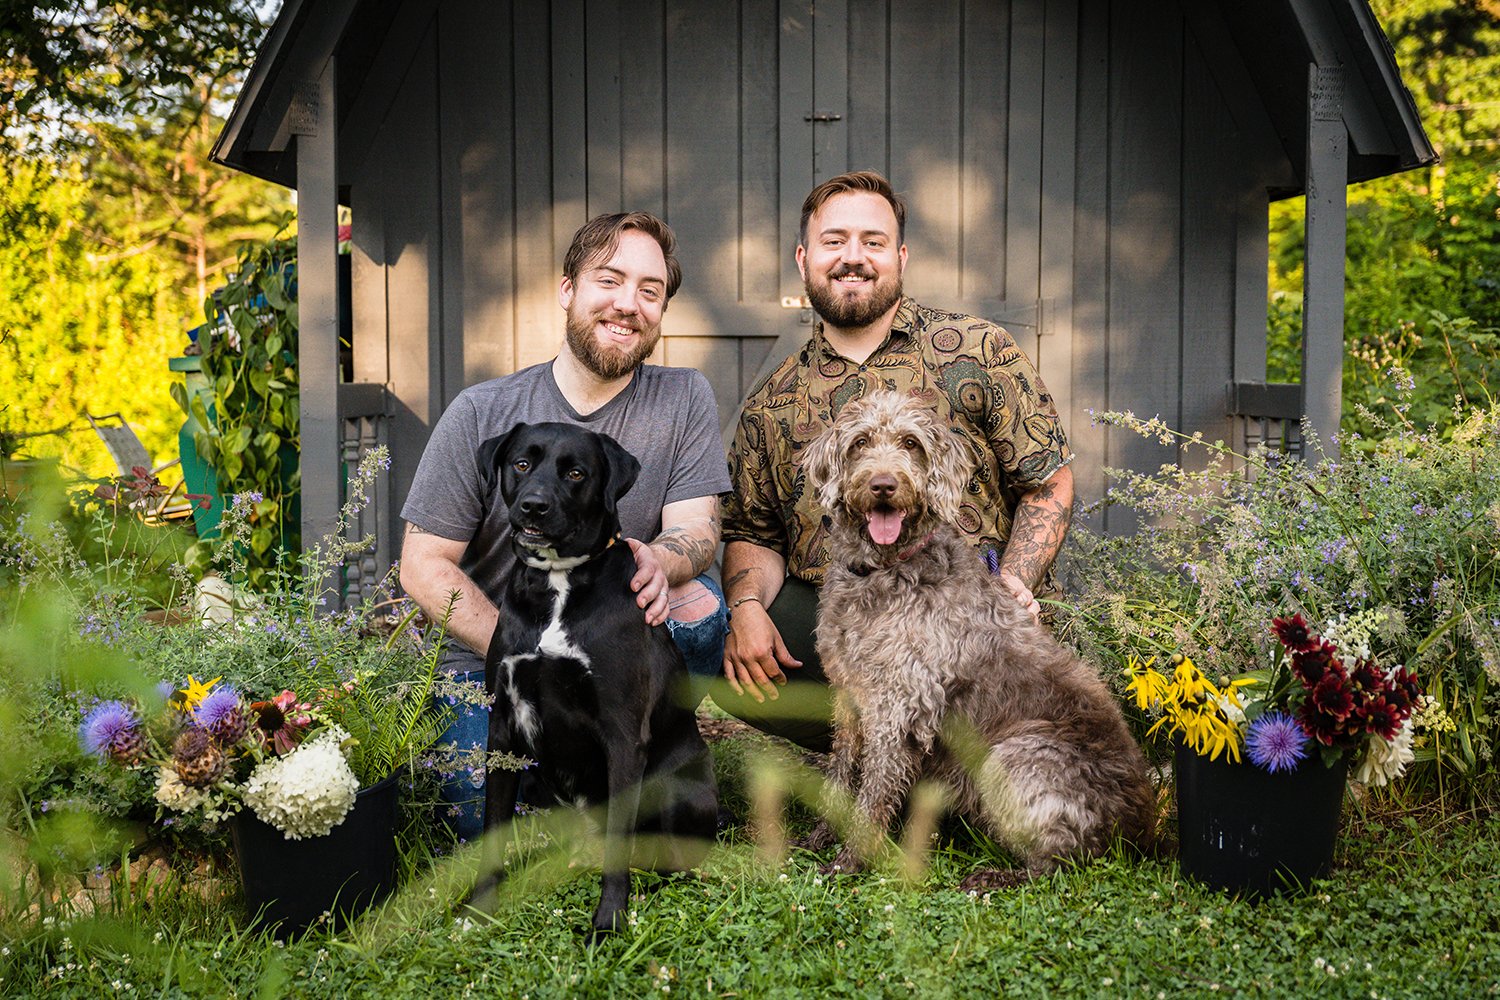 The owners of Fae Cottage Flower Farm poses with their dogs in front of a black shed with buckets of flowers by their side.